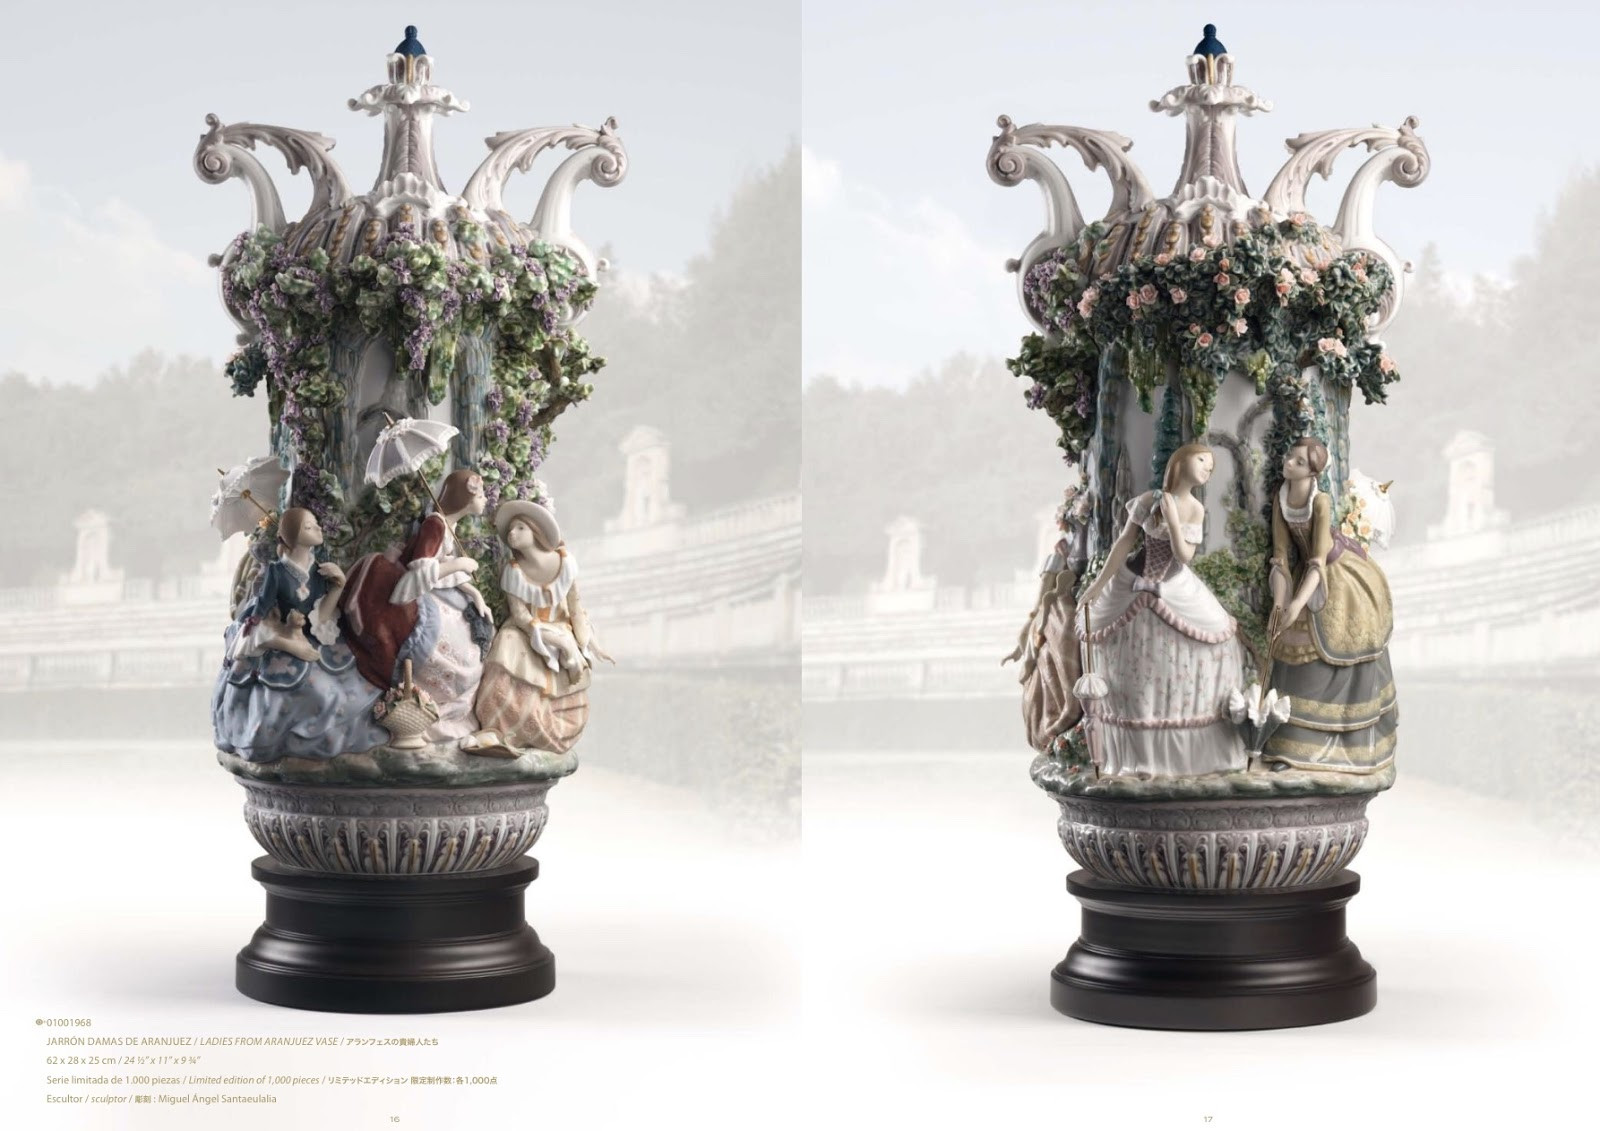 lladro vase flowers of the lladra³ vase an exceptional gift within displaying the ladies from aranjuez will create a talking point amongst your loved ones for a long time to come not only does this lladra³ vase have an